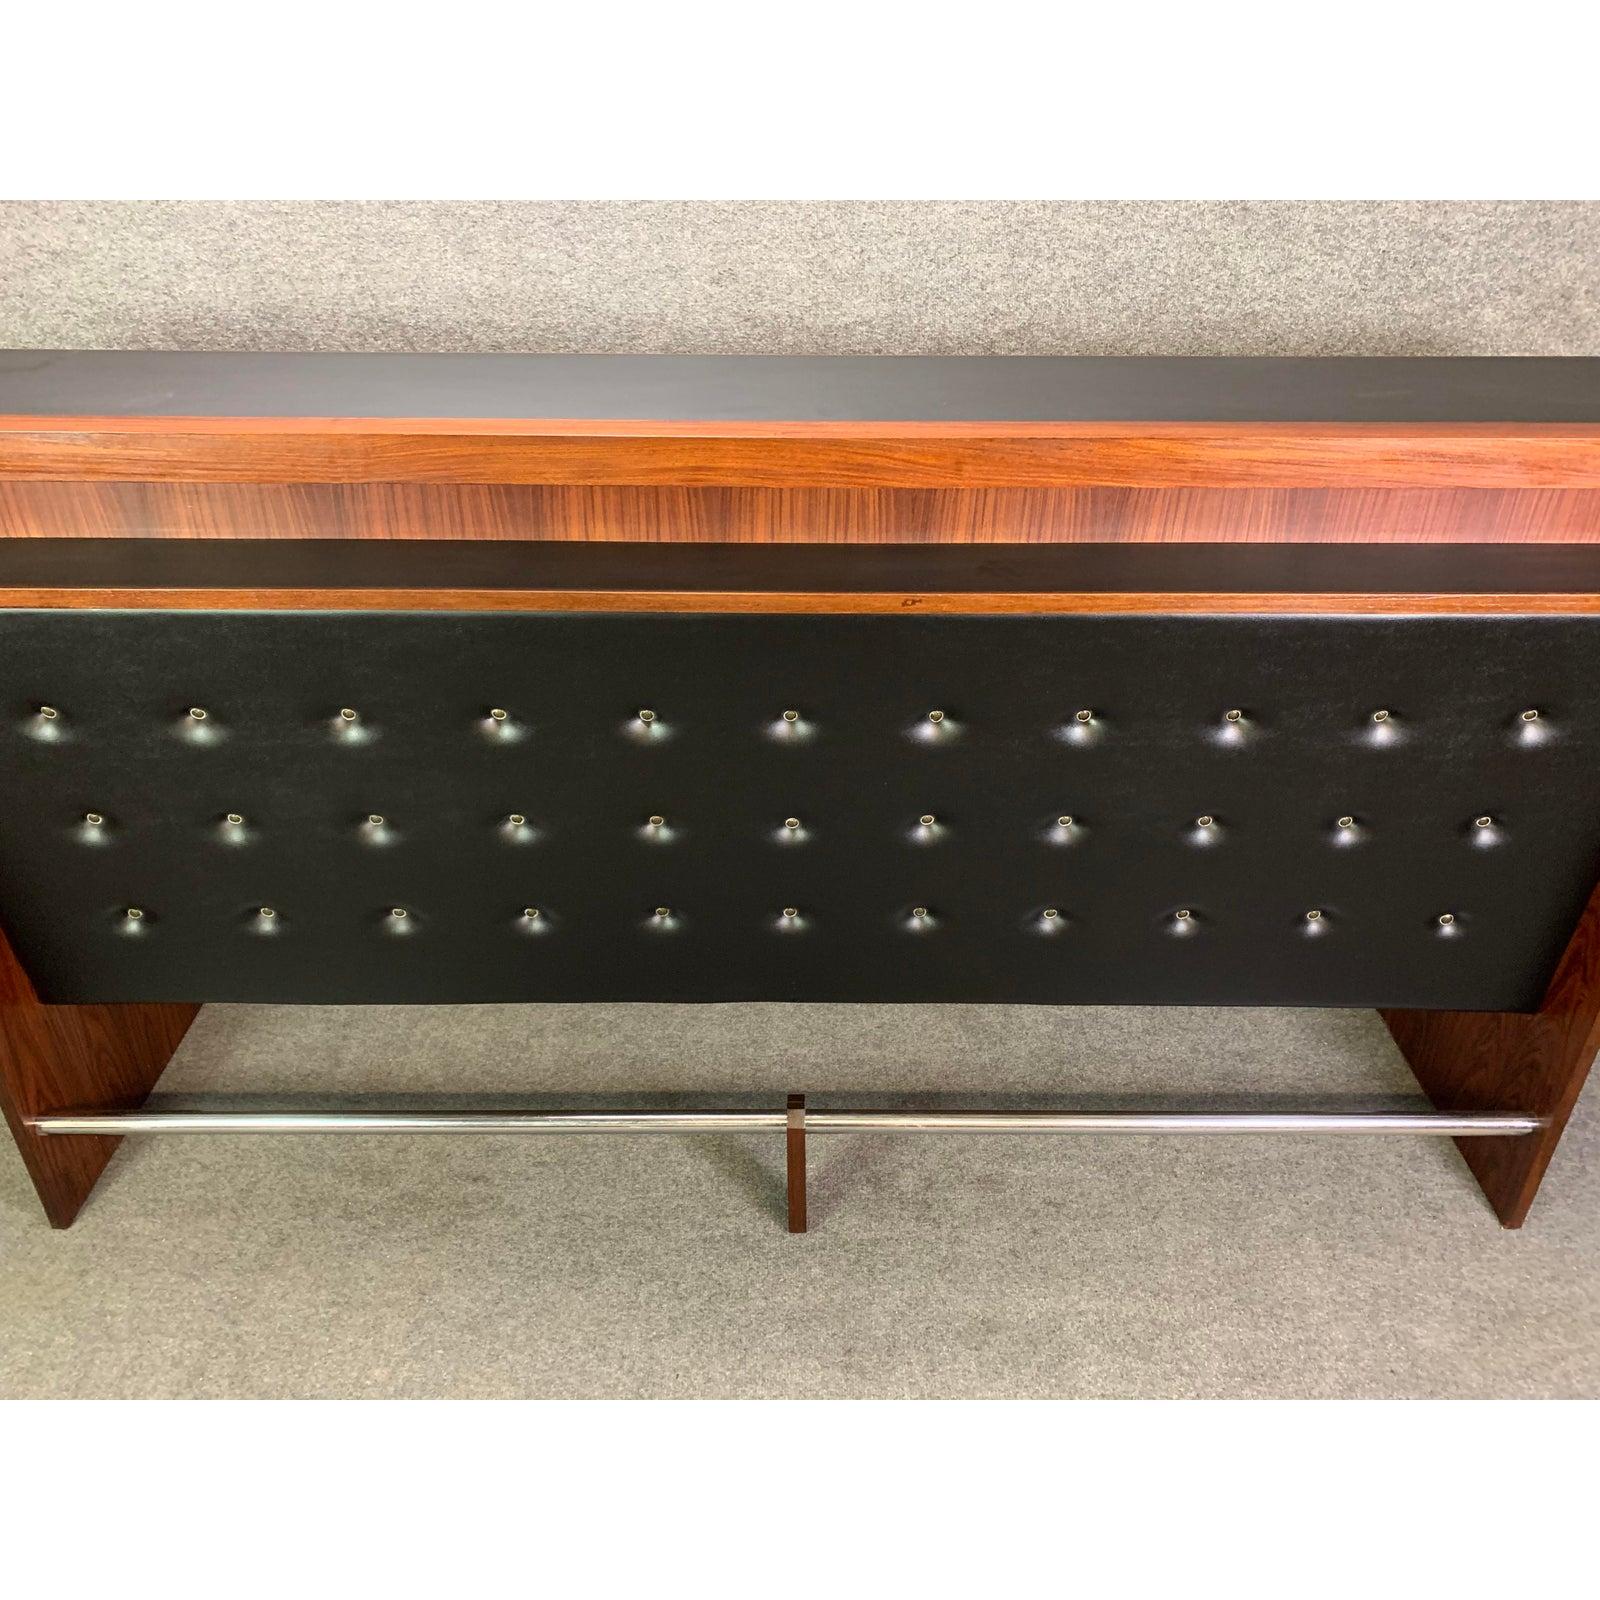 Here is an exceptional Scandinavian Modern bar and 4 stools manufactured in Denmark in the 1960s.
This large bar features a vibrant rosewood grain, a tufted front in black Naugahyde, a chromed footrest at its bottom and many large cocktails